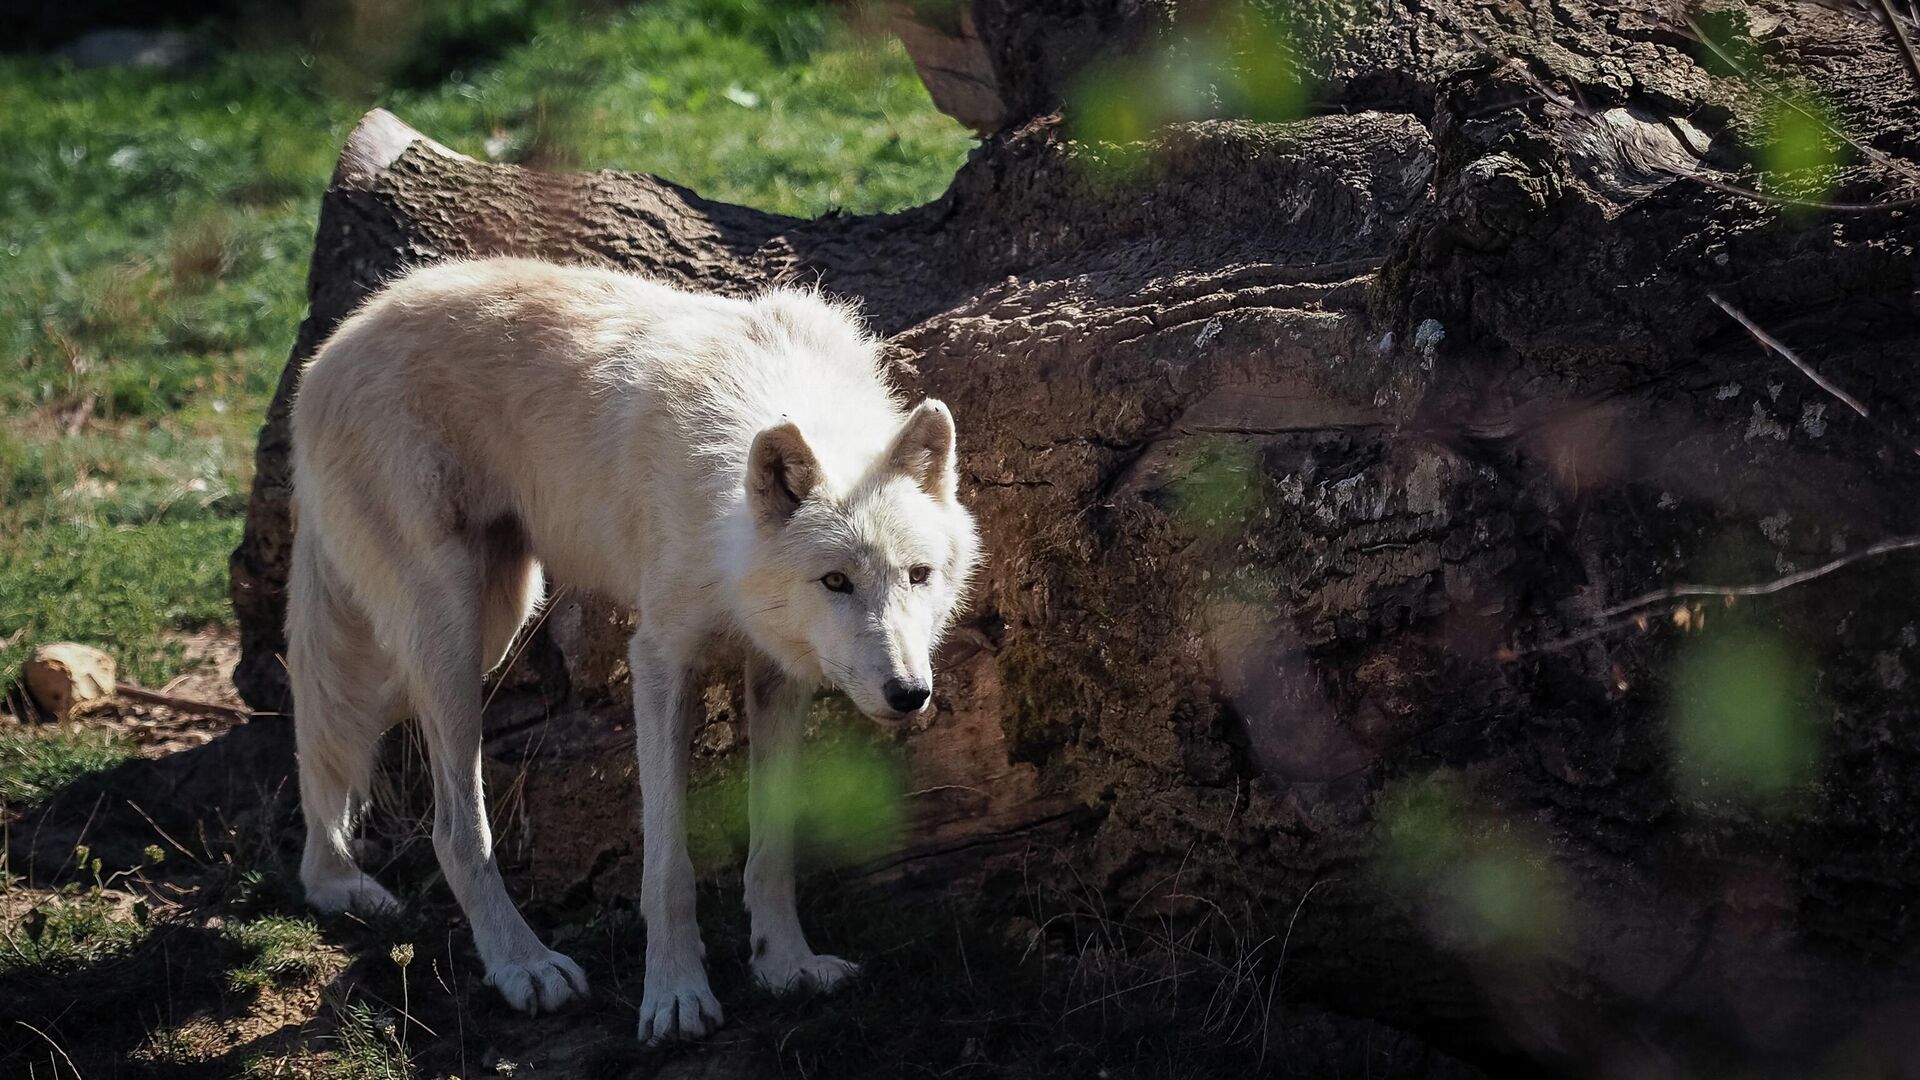 A young arctic wolf walks inside its enclosure at The Beauval Zoo in Saint-Aignan-sur-Cher, central France, on September 2, 2019. (Photo by GUILLAUME SOUVANT / AFP) - Sputnik International, 1920, 19.09.2022